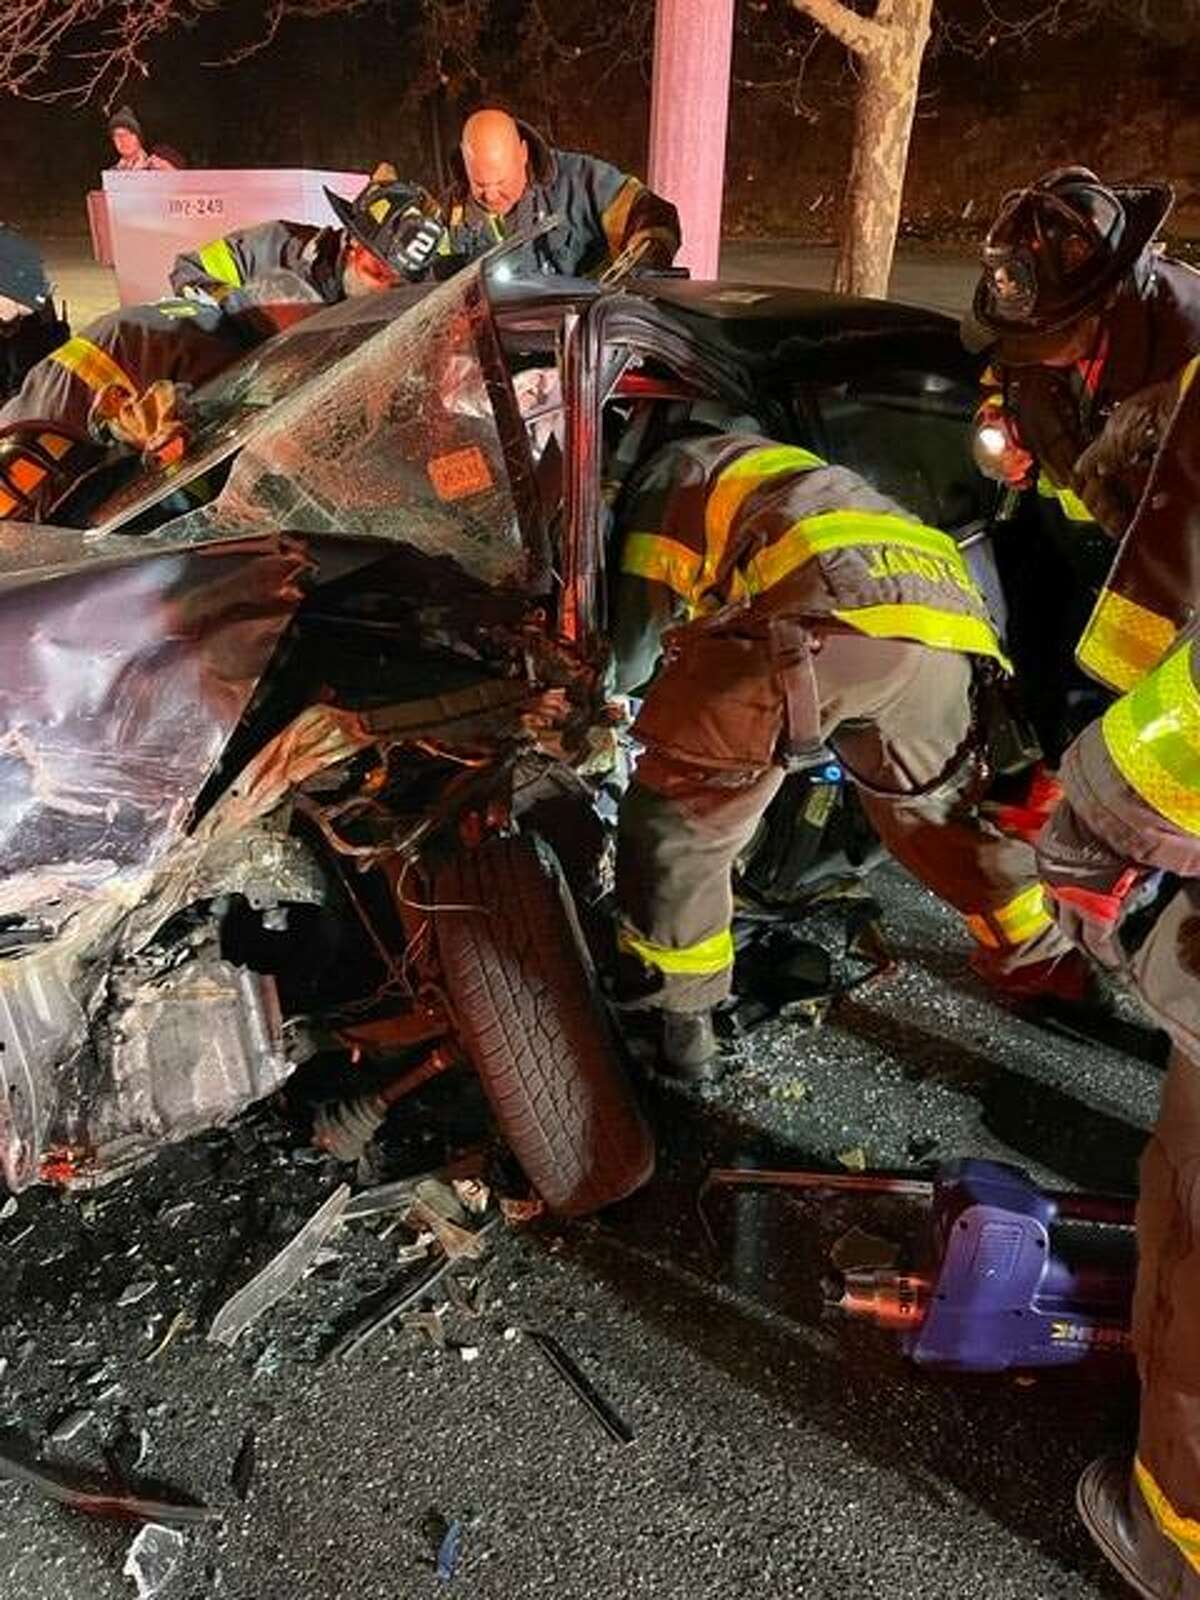 One driver was taken to the hospital with life-threatening injuries after a crash at Westport Avenue and Dry Hill Road in Norwalk, Conn., around 11:20 p.m. Sunday, Dec. 26, 2021.